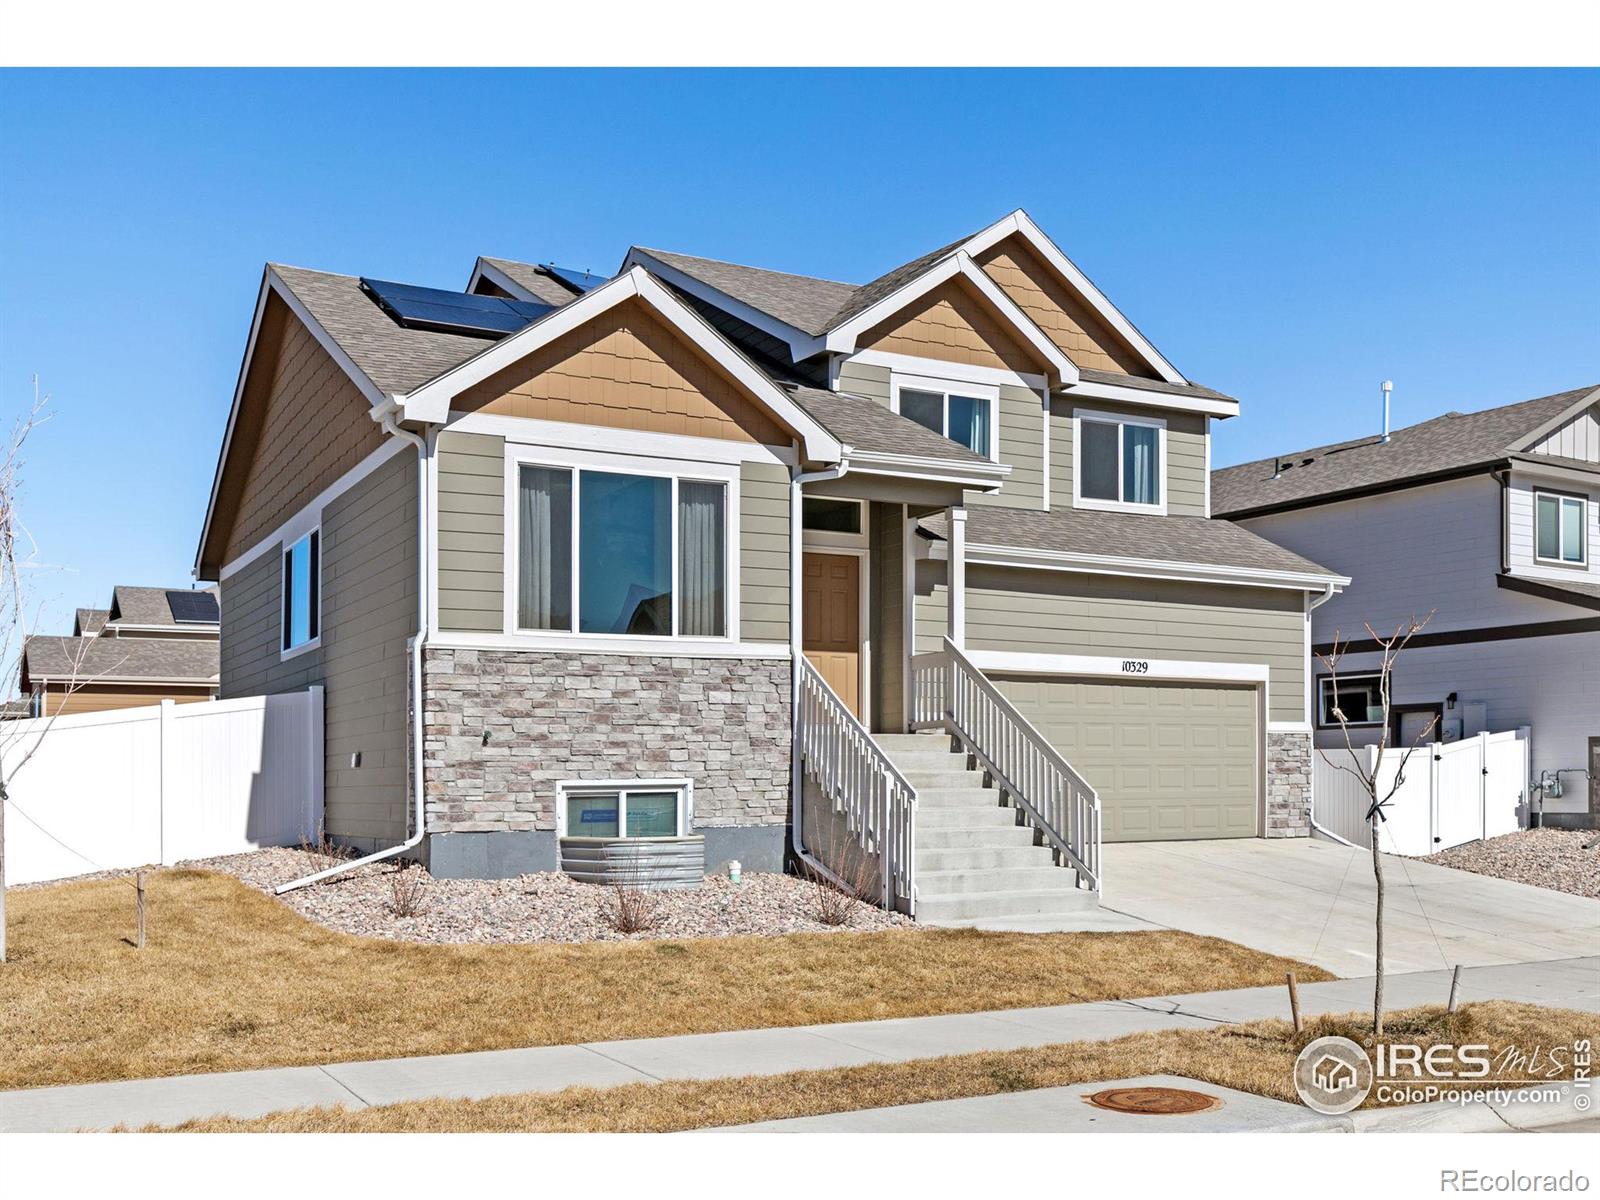 Report Image for 10329  17th Street,Greeley, Colorado